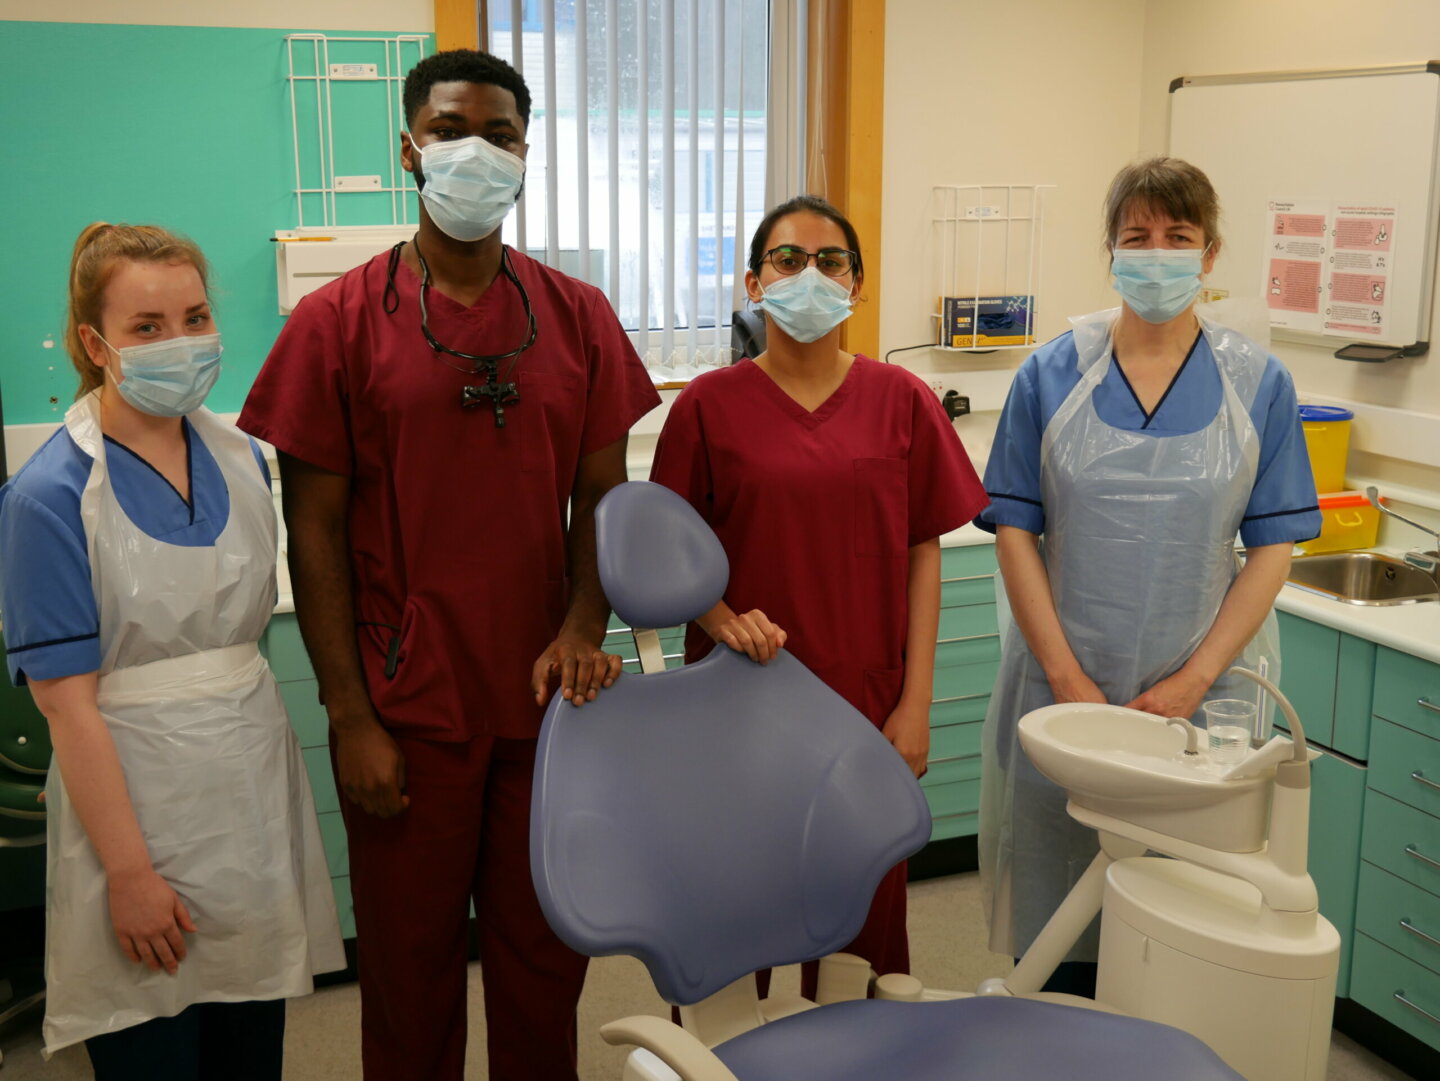 Aberdeen dental students head to Shetland to gain valuable experience